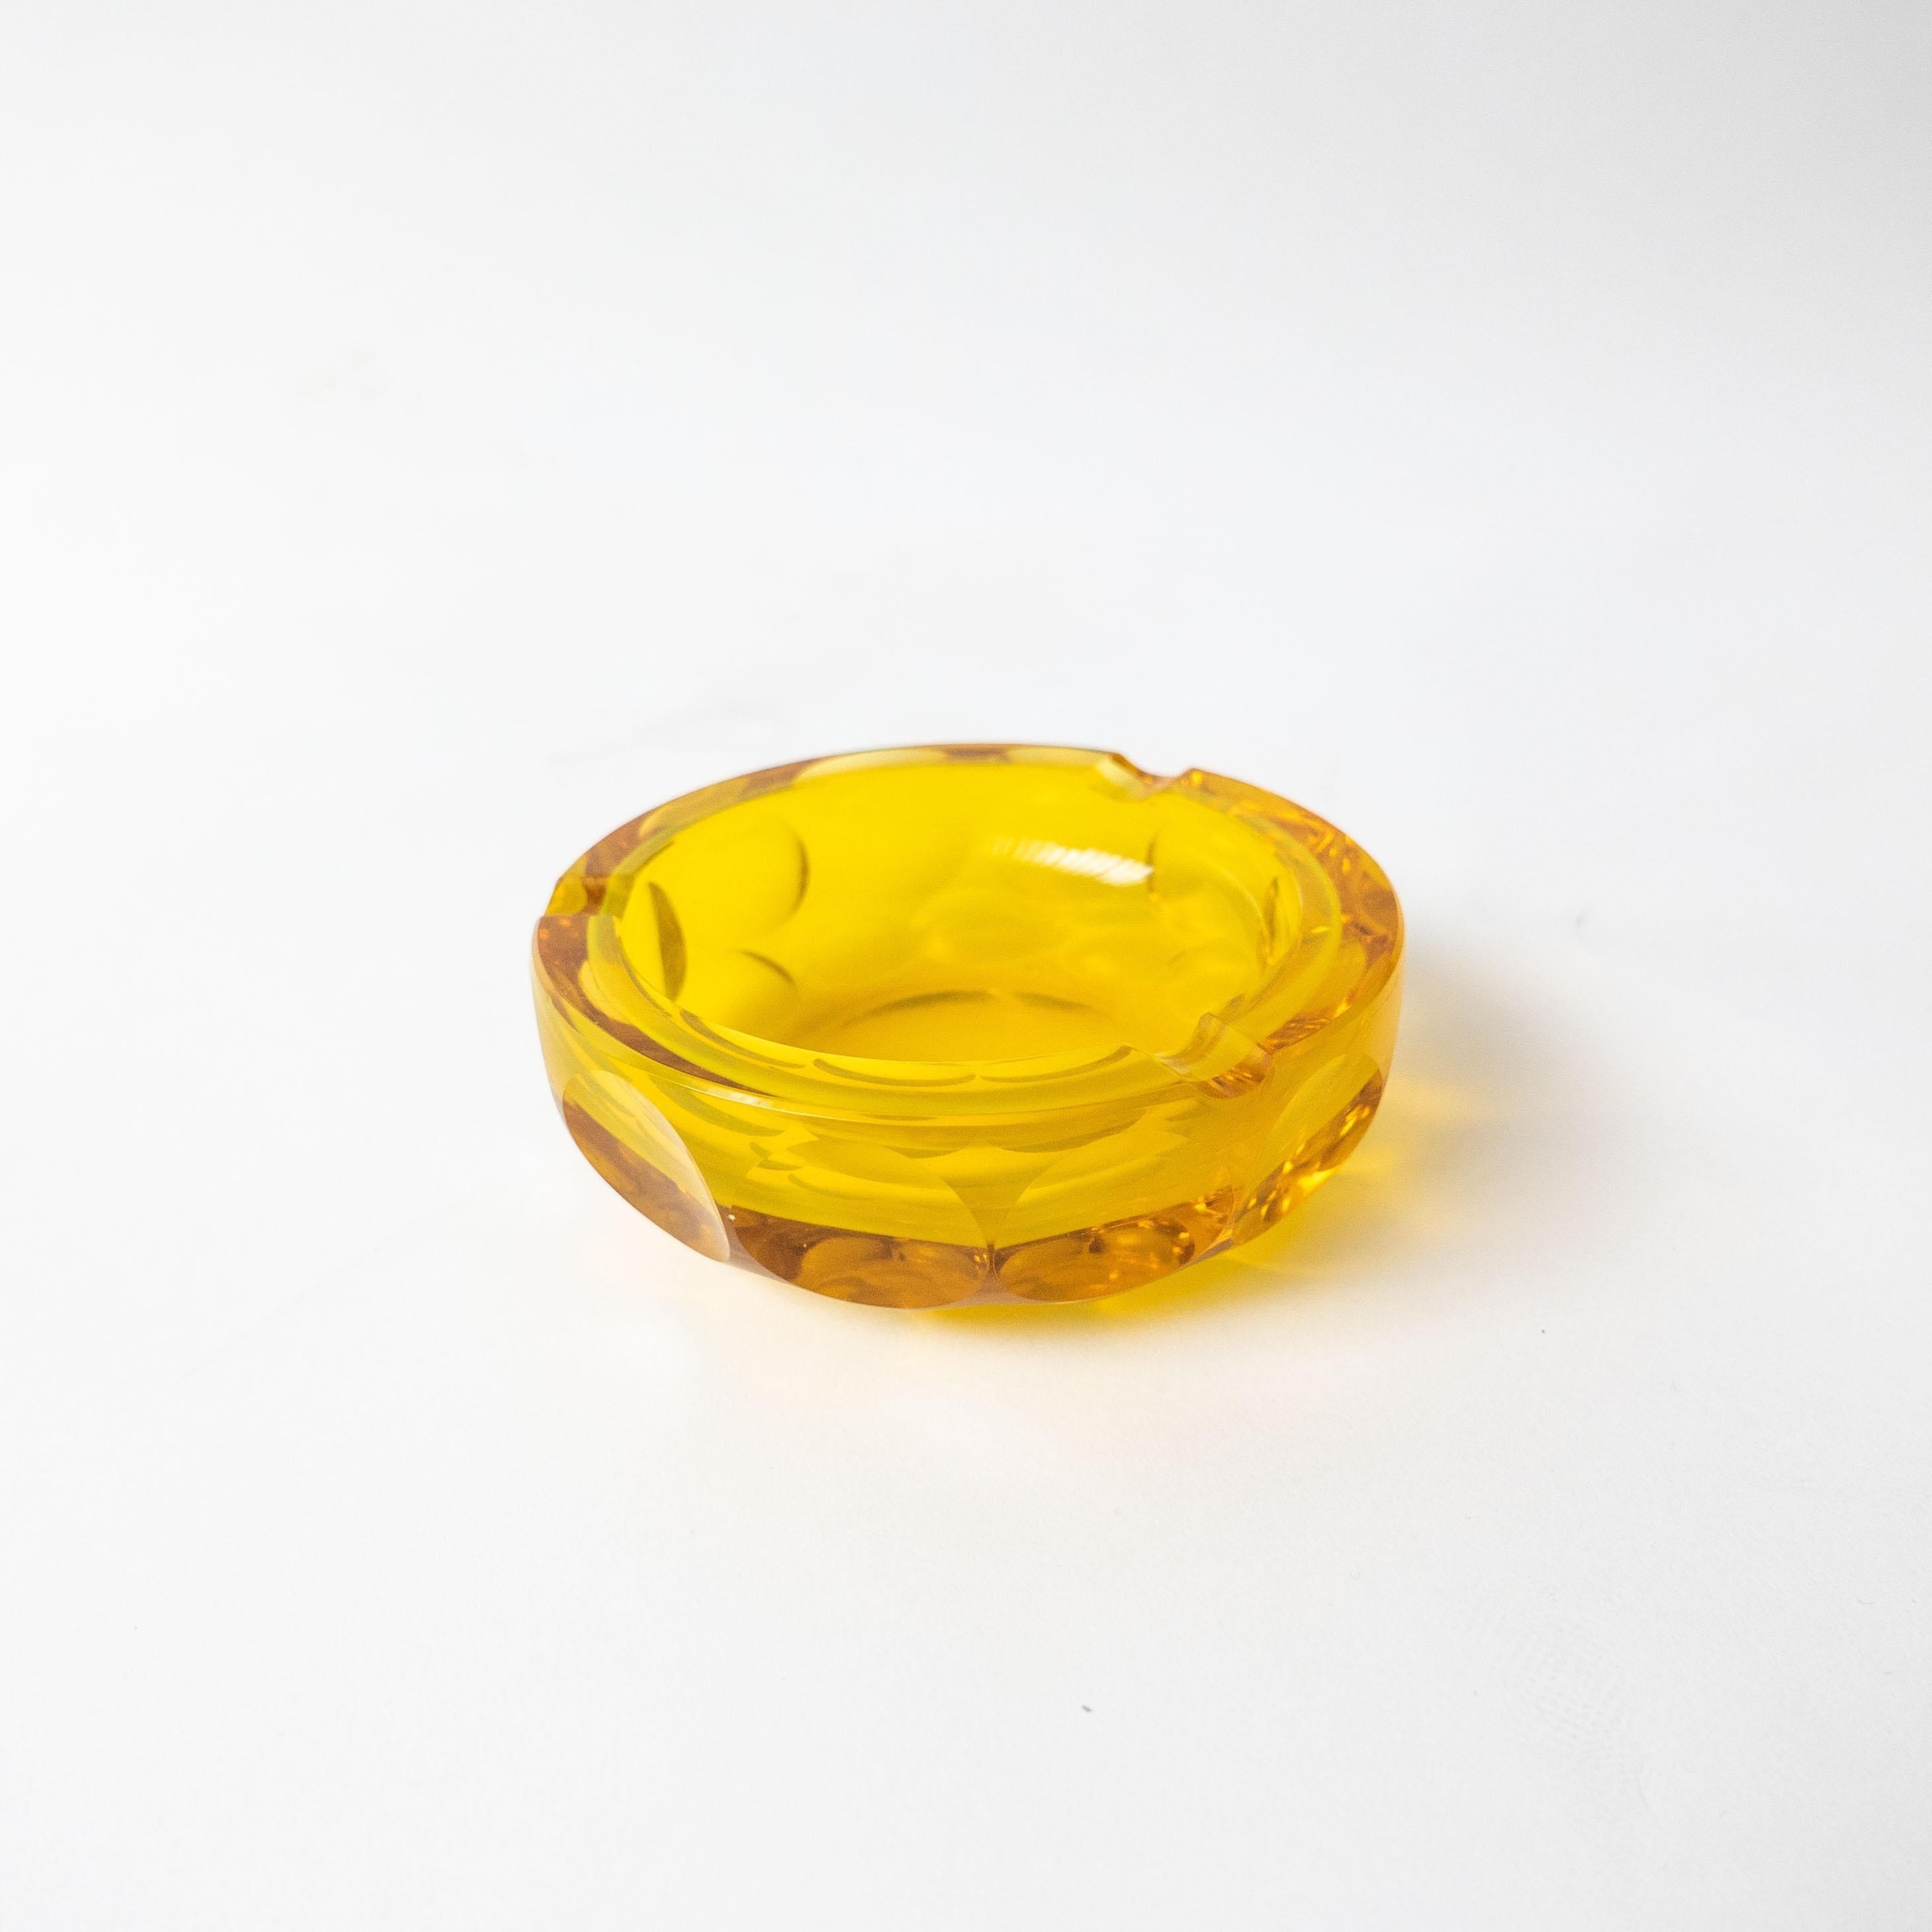 Decorative bowl in yellow glass with a dotted pattern all around. Originally intended as an ashtray, as proven by the three notches around the edge, but likelly never used as such, given the absence of any kind of mark from the bottom. 

As shown in